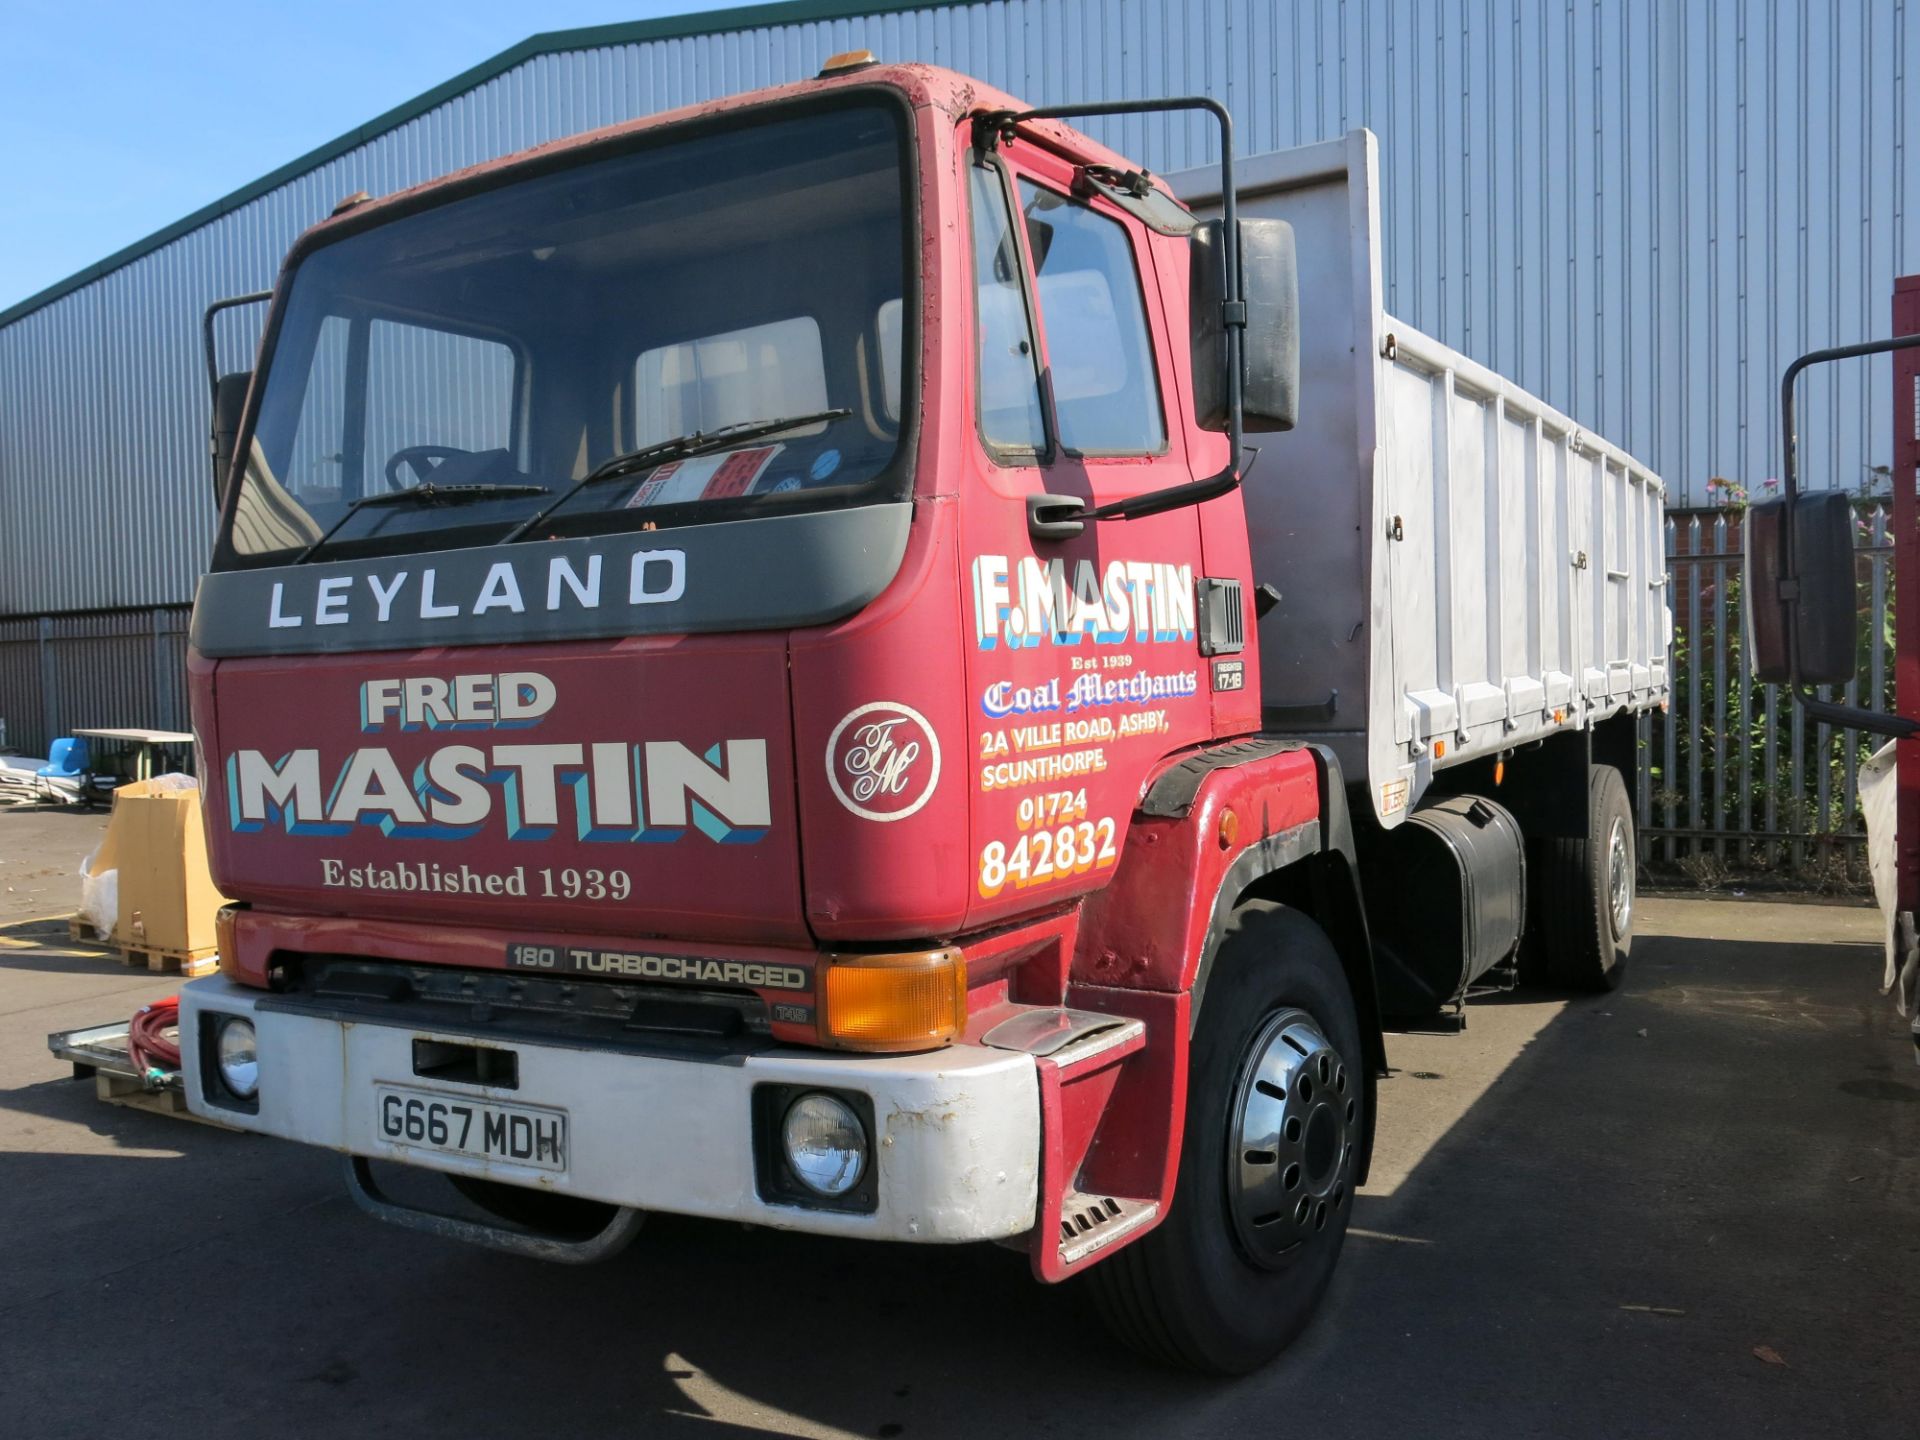 * 1989 Leyland 180 Turbo-charged T45 Freighter 1718 17 tonne dropside lorry. Registration G667